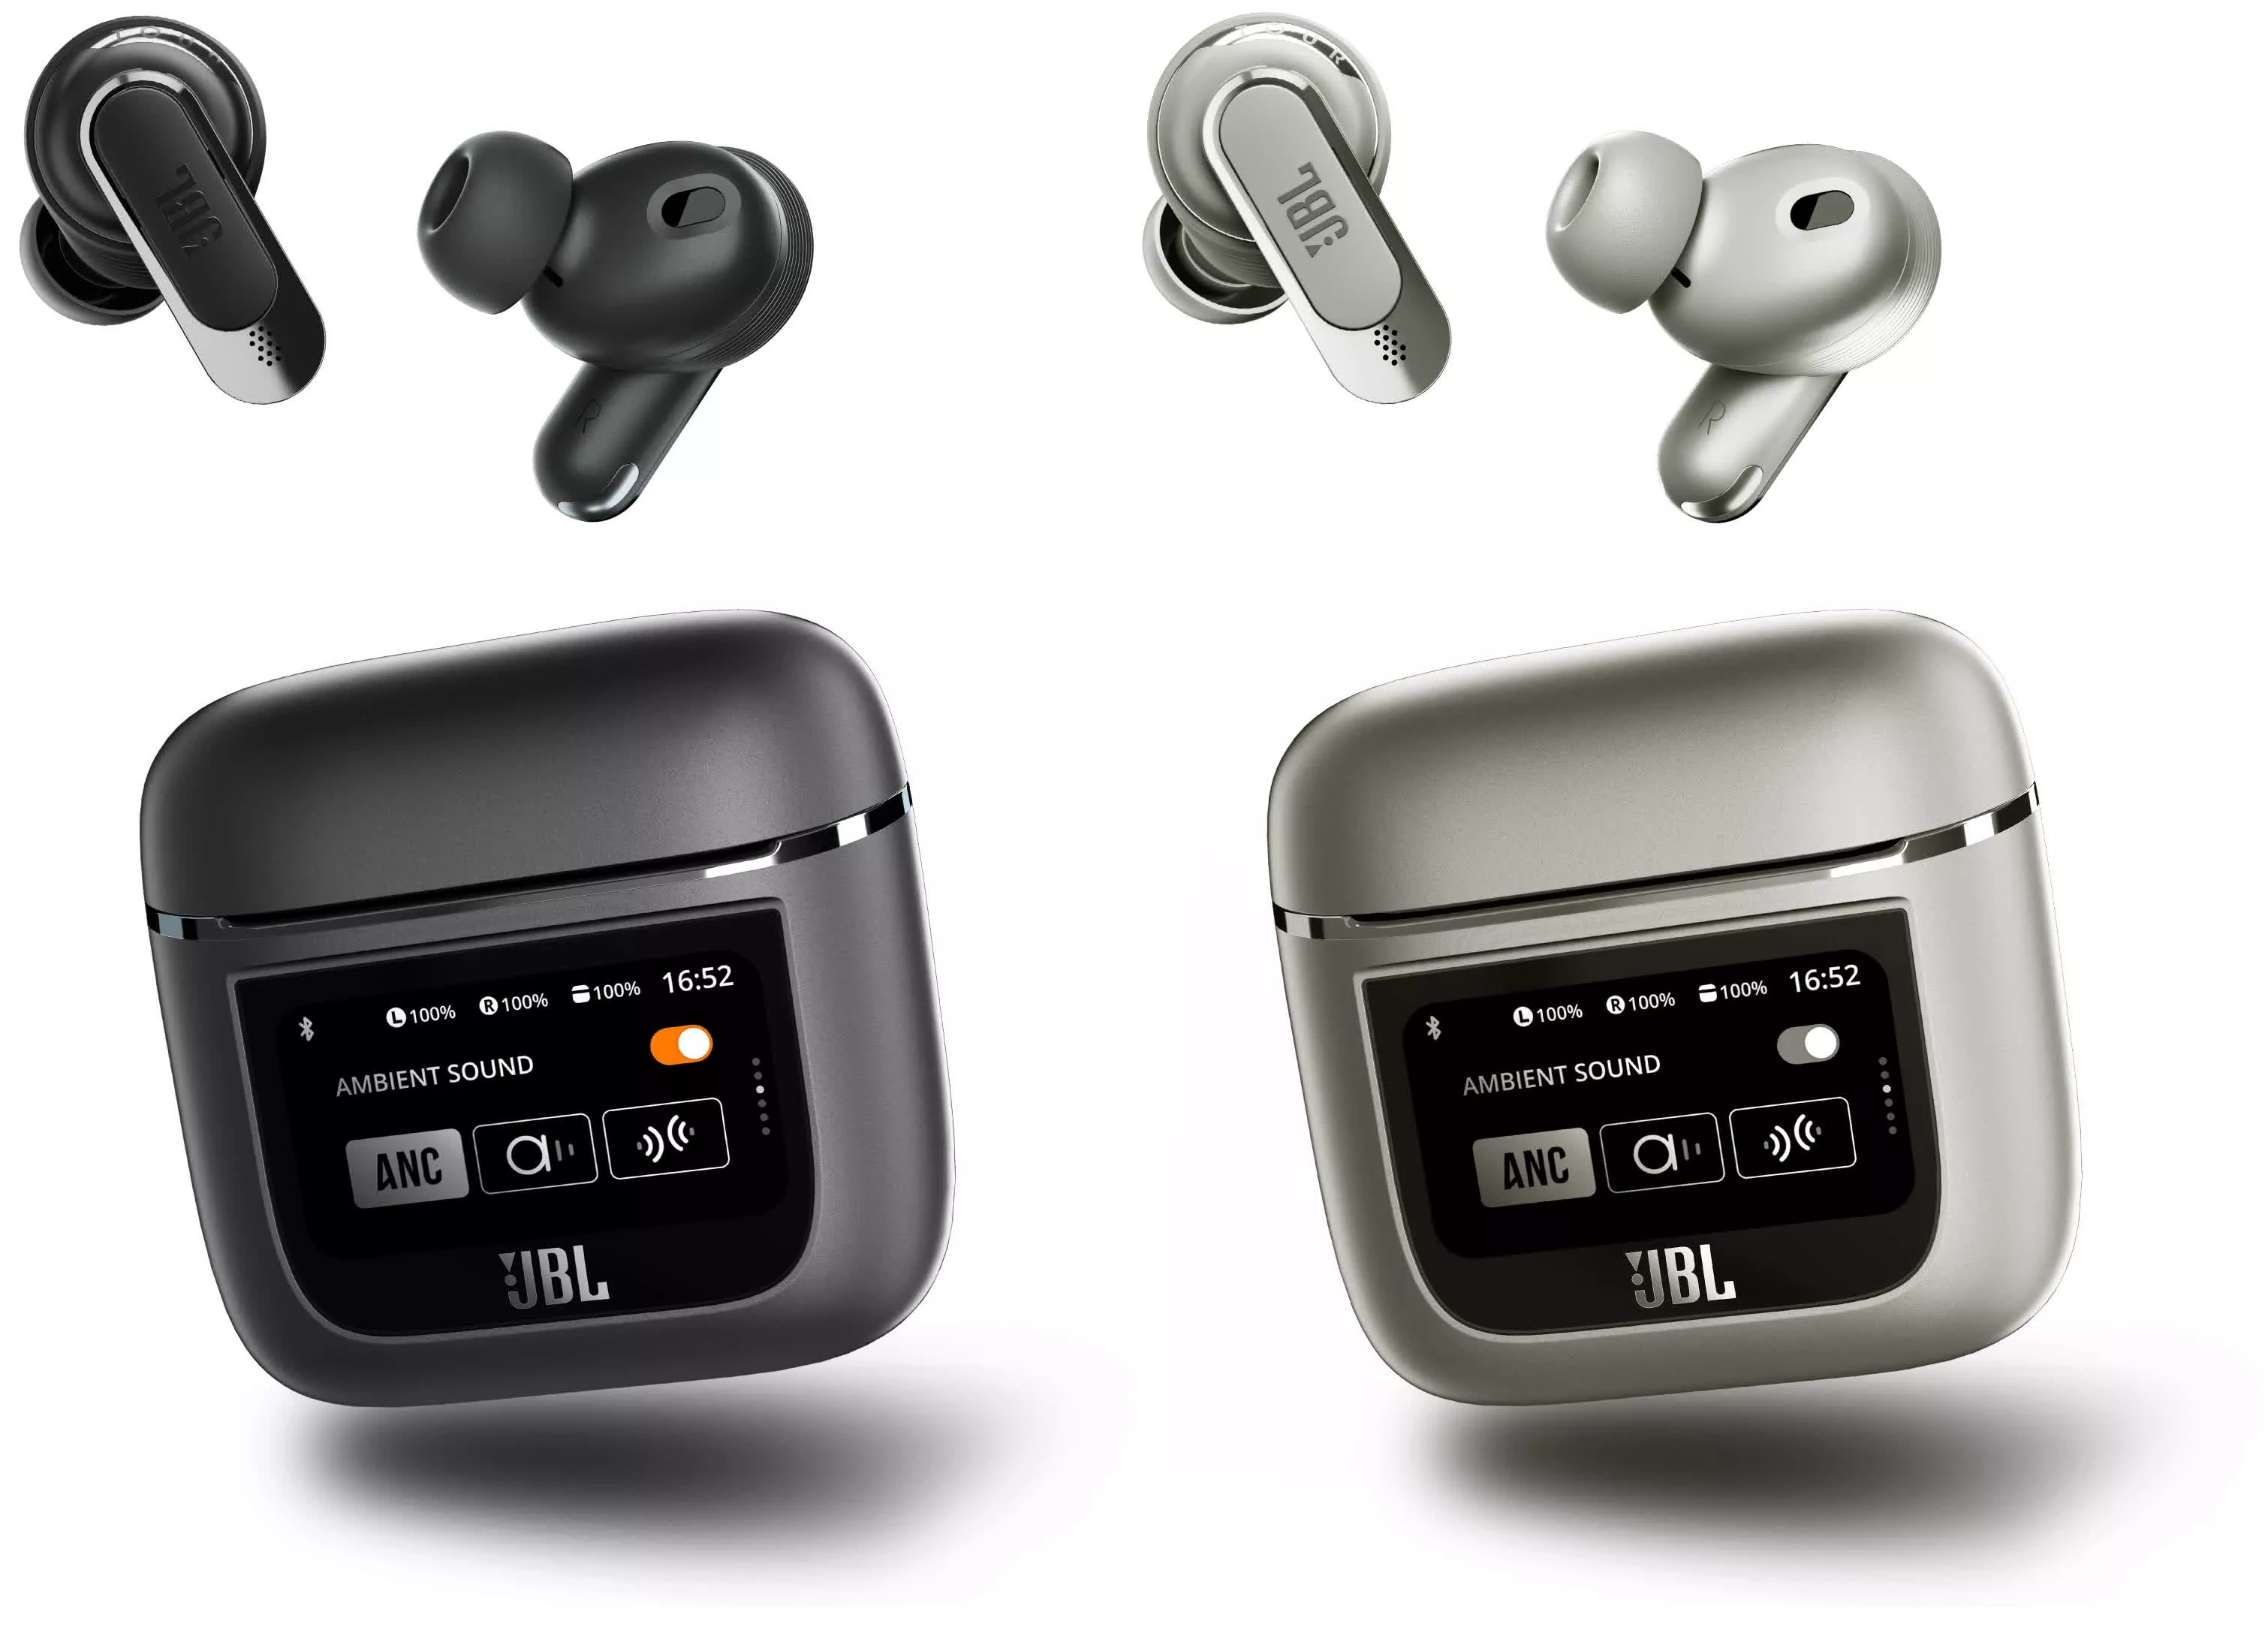 JBL's new wireless earbuds come with a touchscreen-equipped charging case